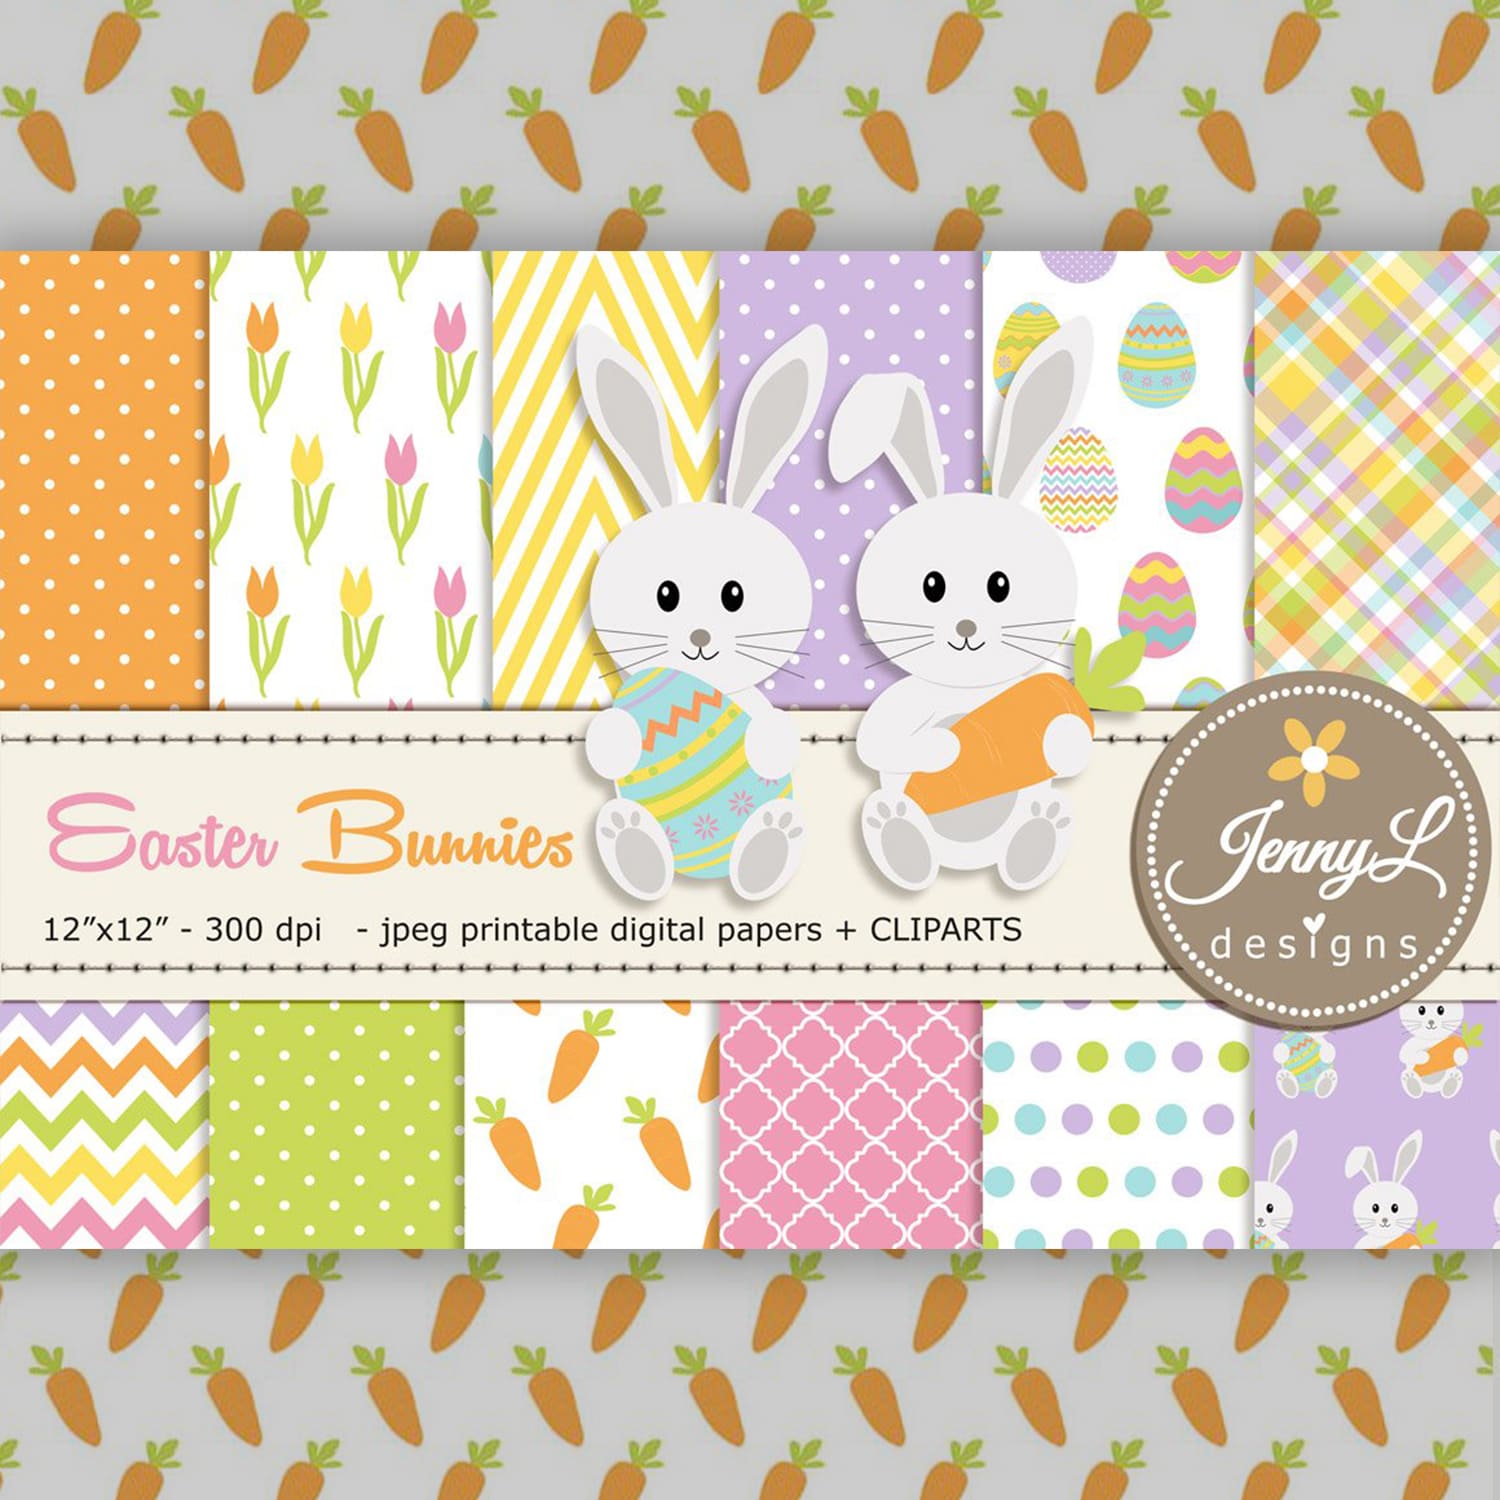 Easter Bunny Rabbit Digital Papers cover.